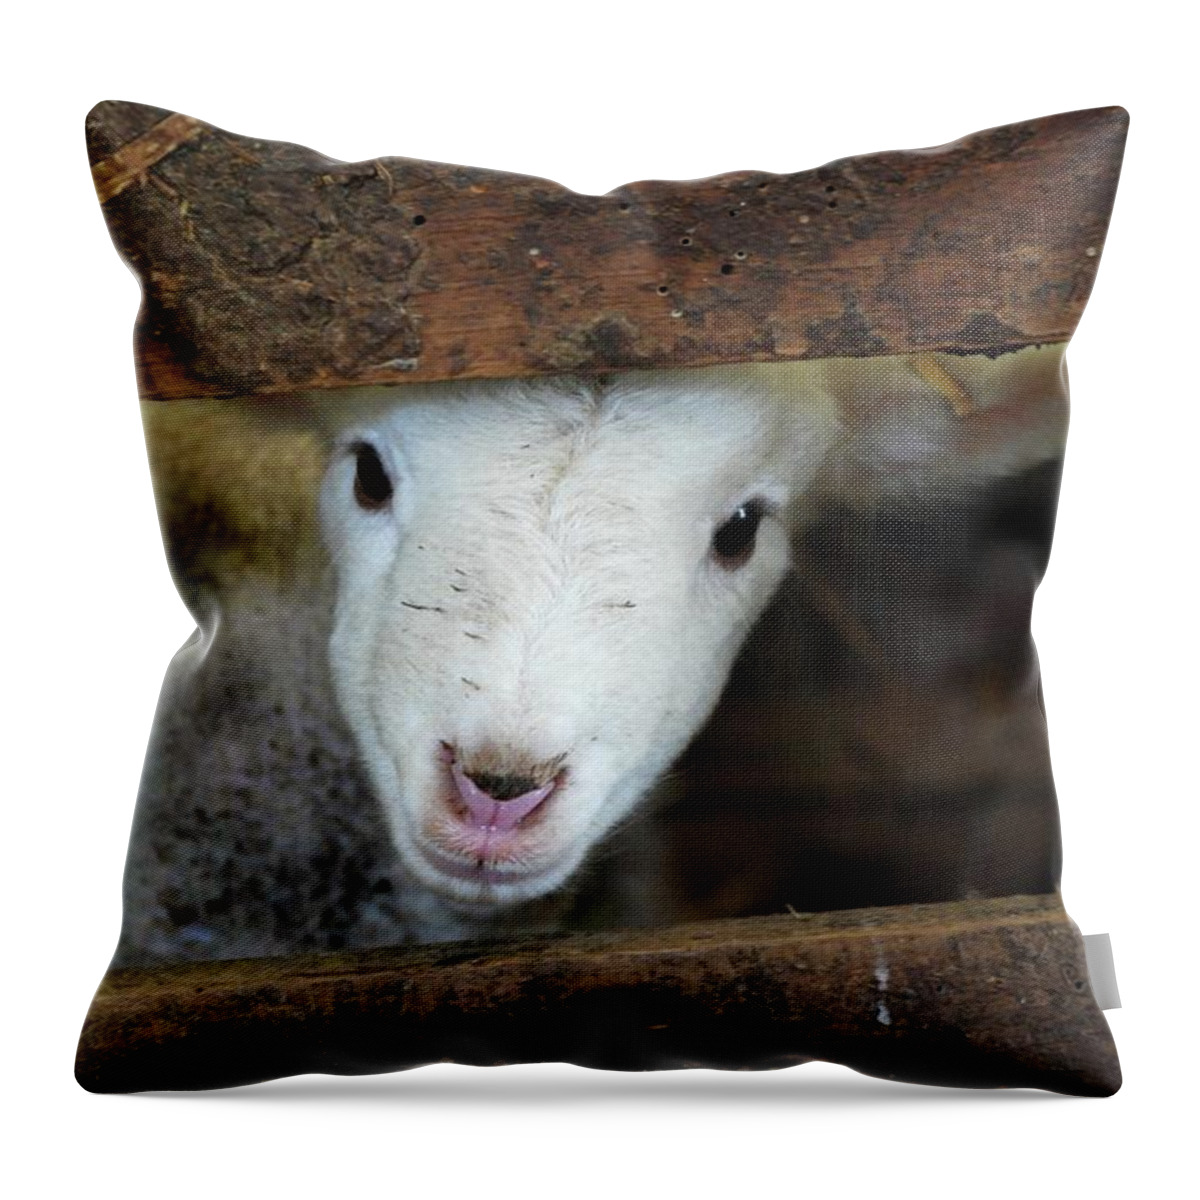 Animal Themes Throw Pillow featuring the photograph Lamb by Christy Majors